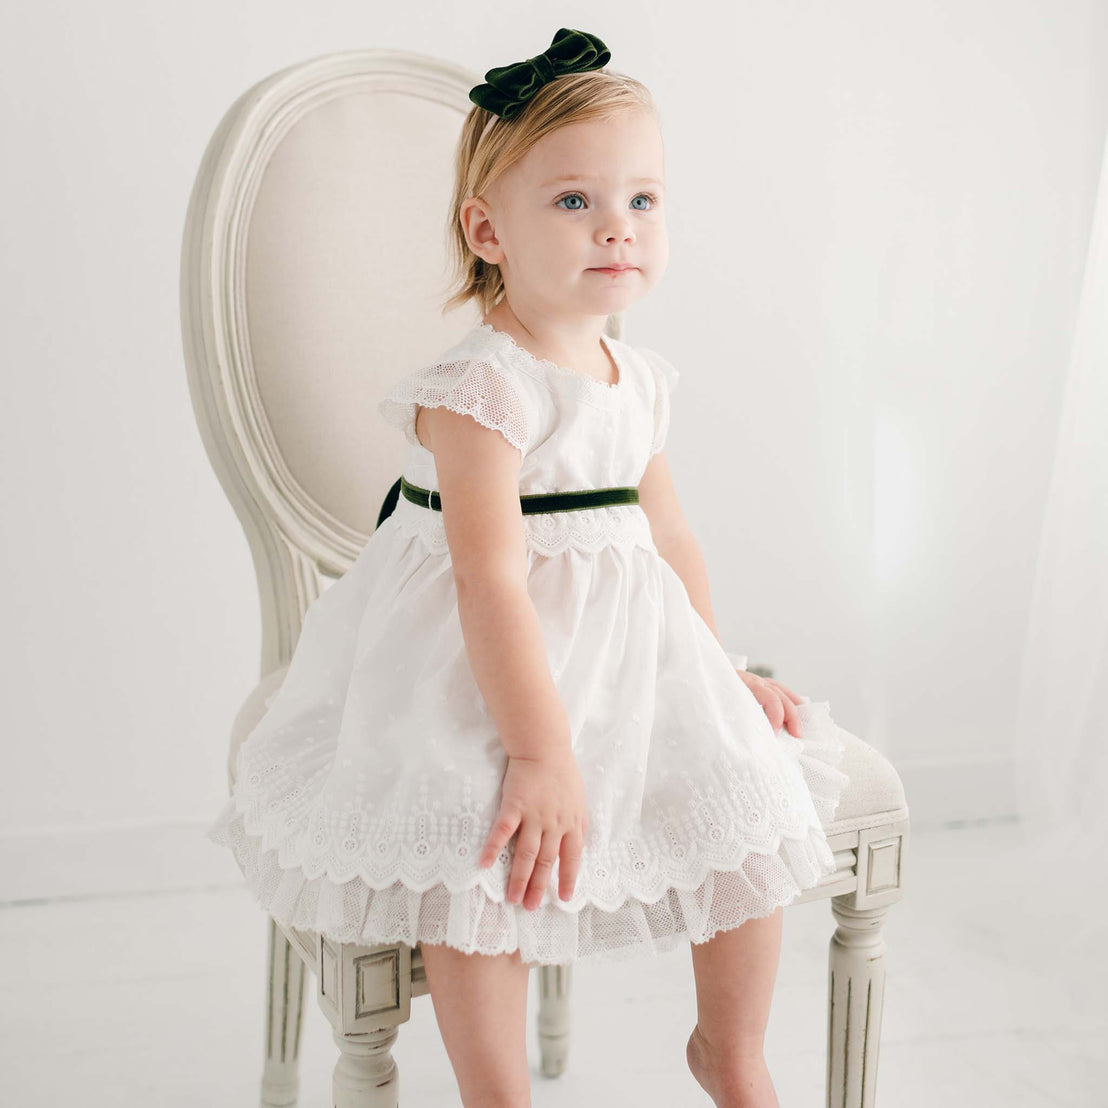 A small child in a vintage white christening dress with an Emily Green Velvet Bow Headband and matching headband sits on an elegant heirloom chair in a white room, looking to the side with a gentle expression.